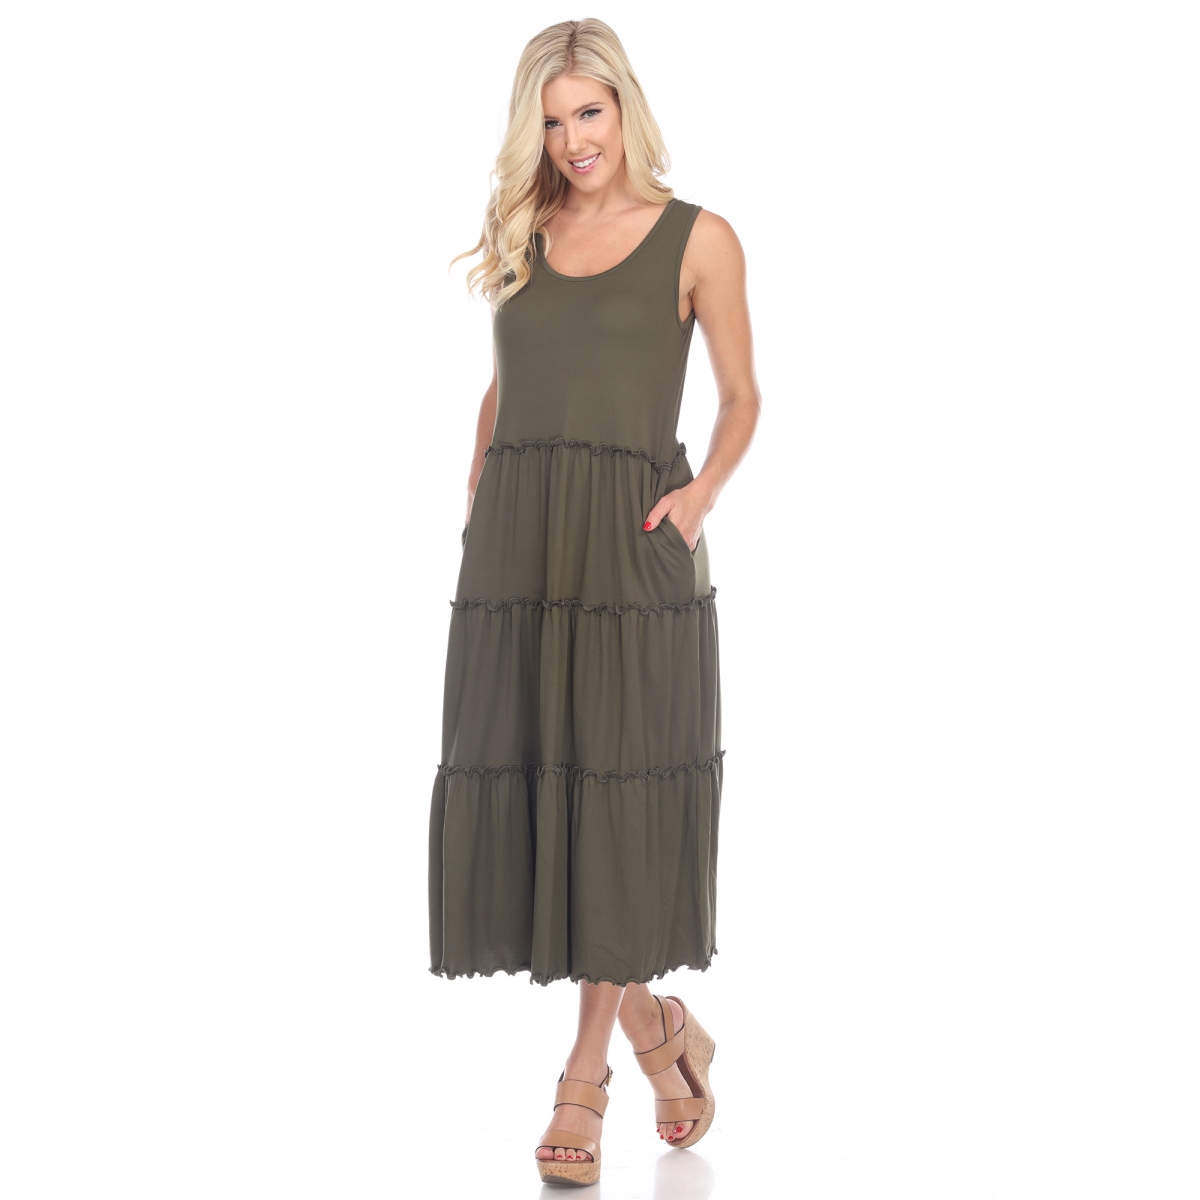 Picture of White Mark 315-02-XL Olive Scoop Neck Teired Midi Dress - Extra Large